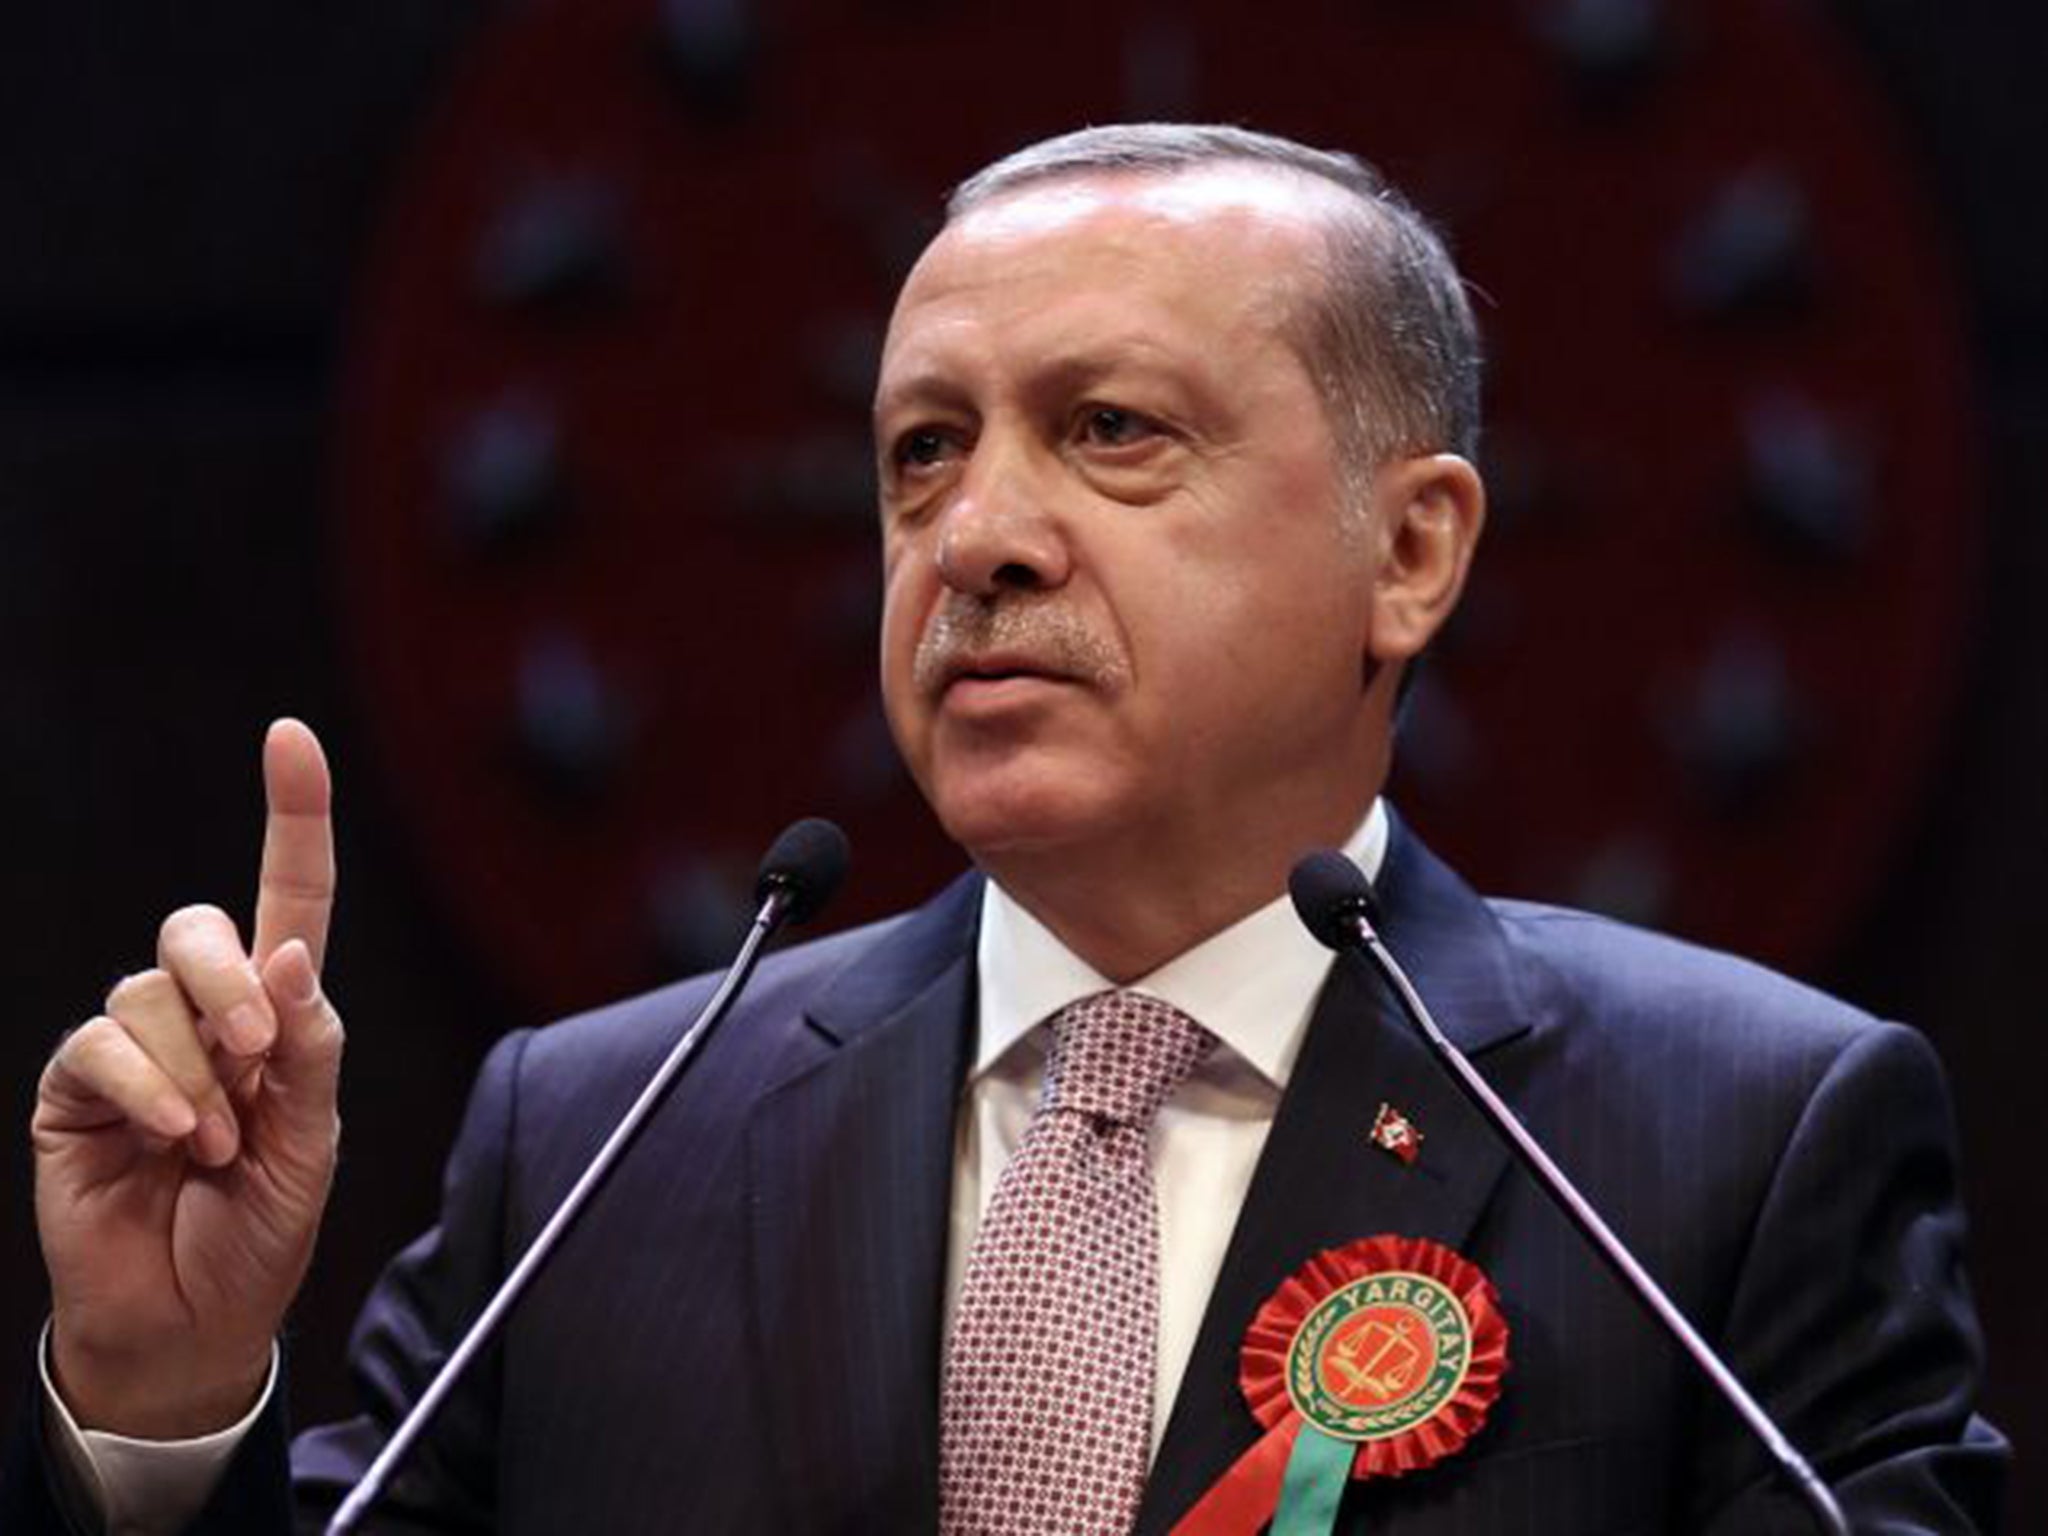 President Erdogan addressed reporters in Ankara on his return from the G20 summit in Hangzhou, China, on Tuesday